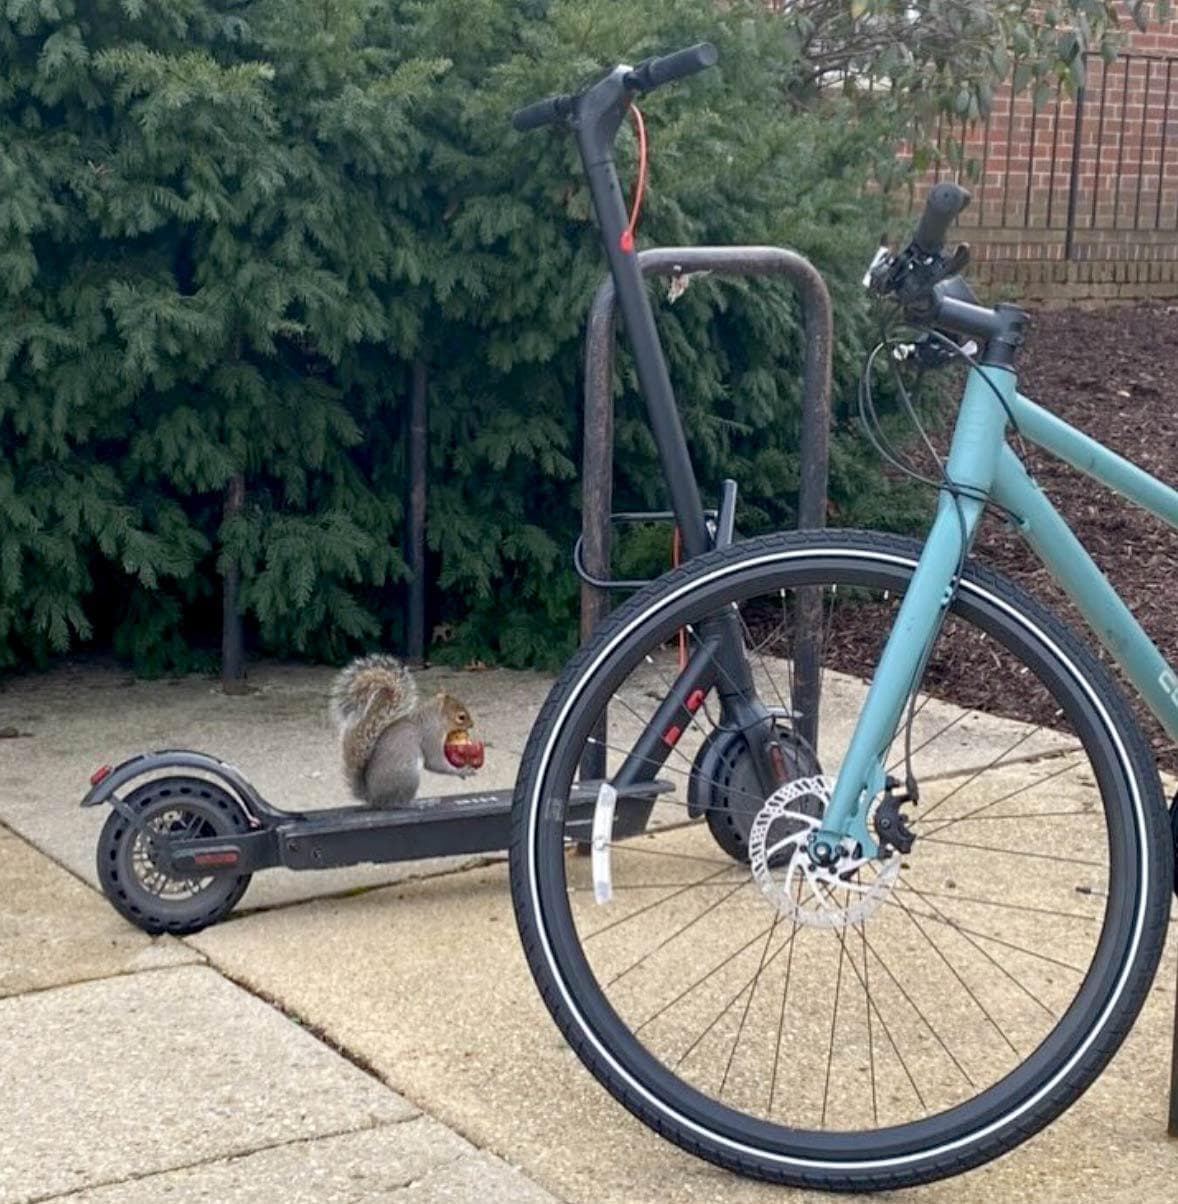 squirrel on a scooter